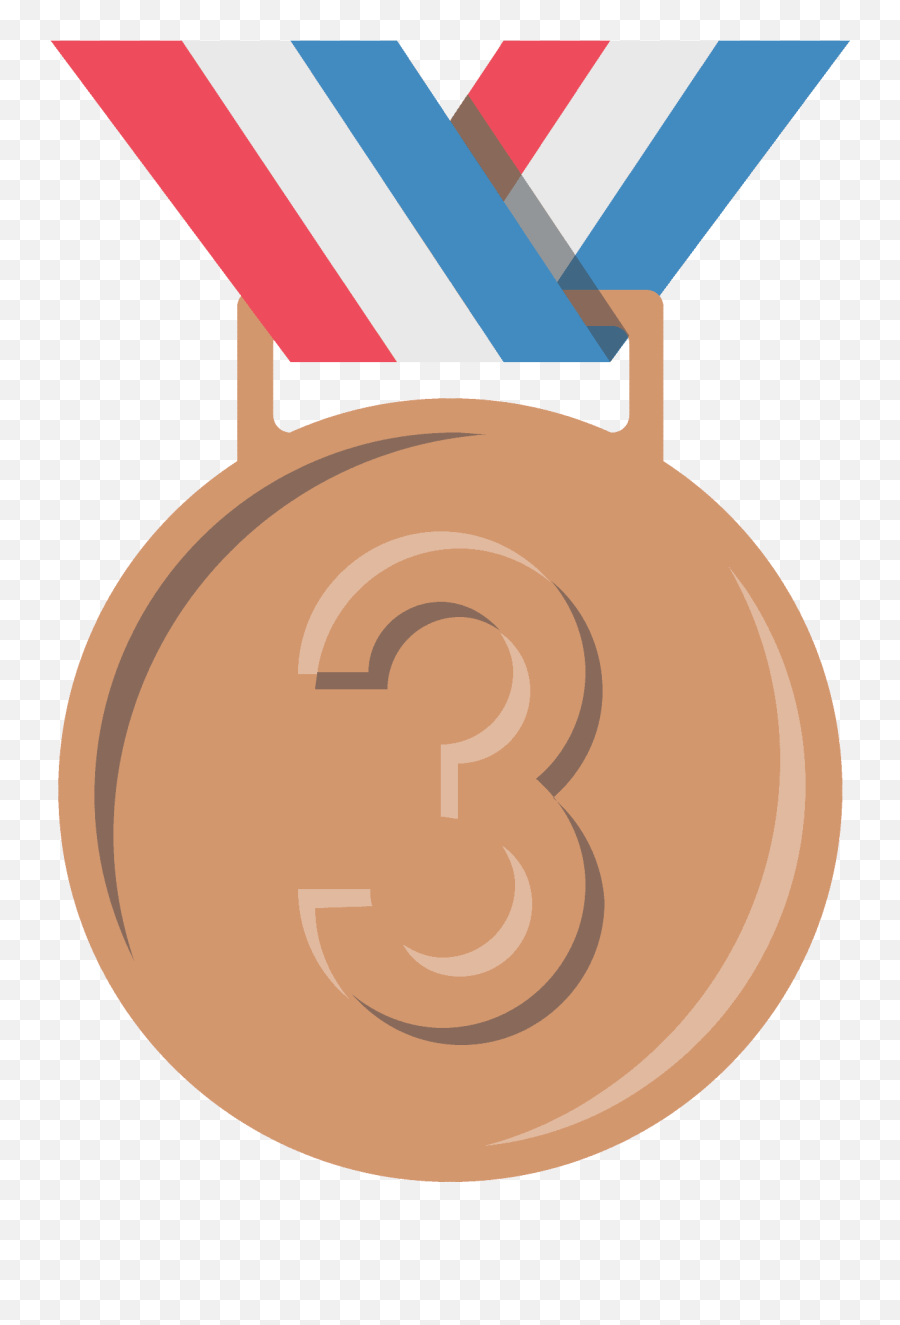 3rd Place Medal Emoji Clipart Free Download Transparent - 3rd Place Medal Emoji,3 Emojis